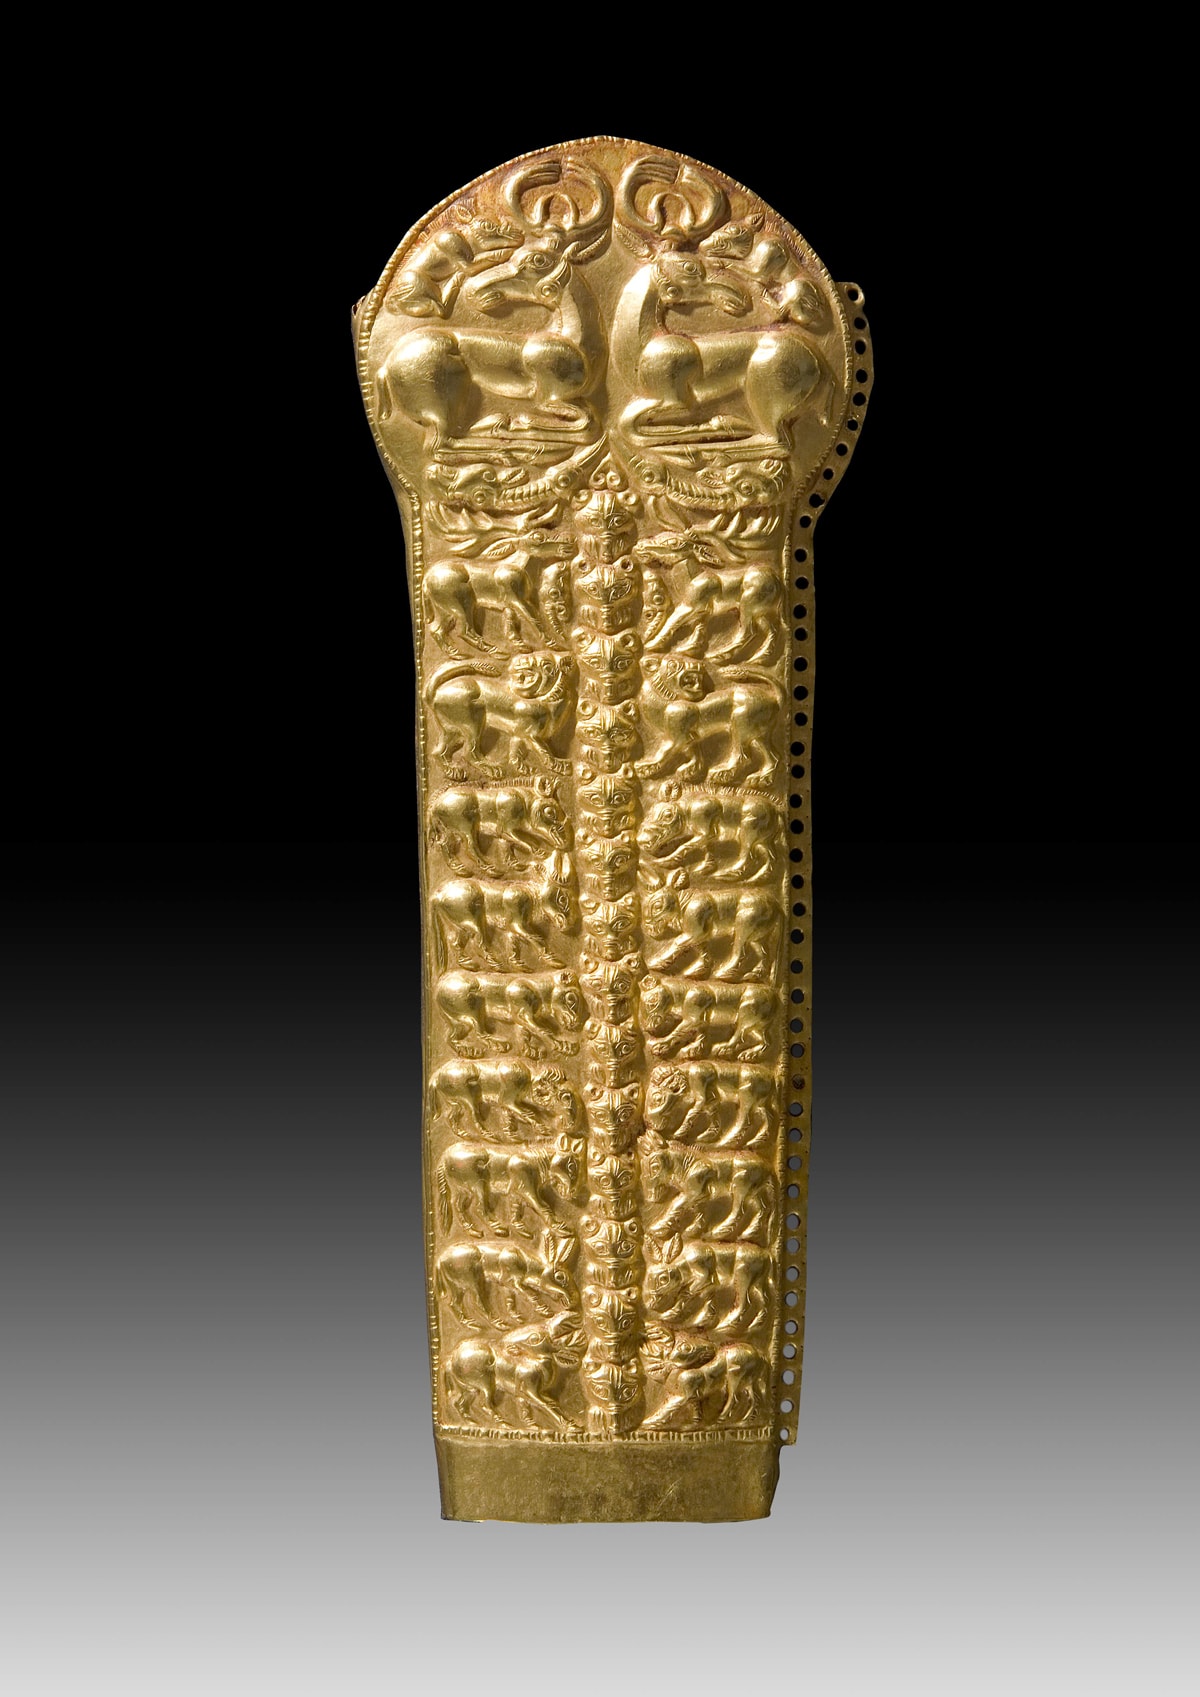 The upper decorative sheet of the scabbard